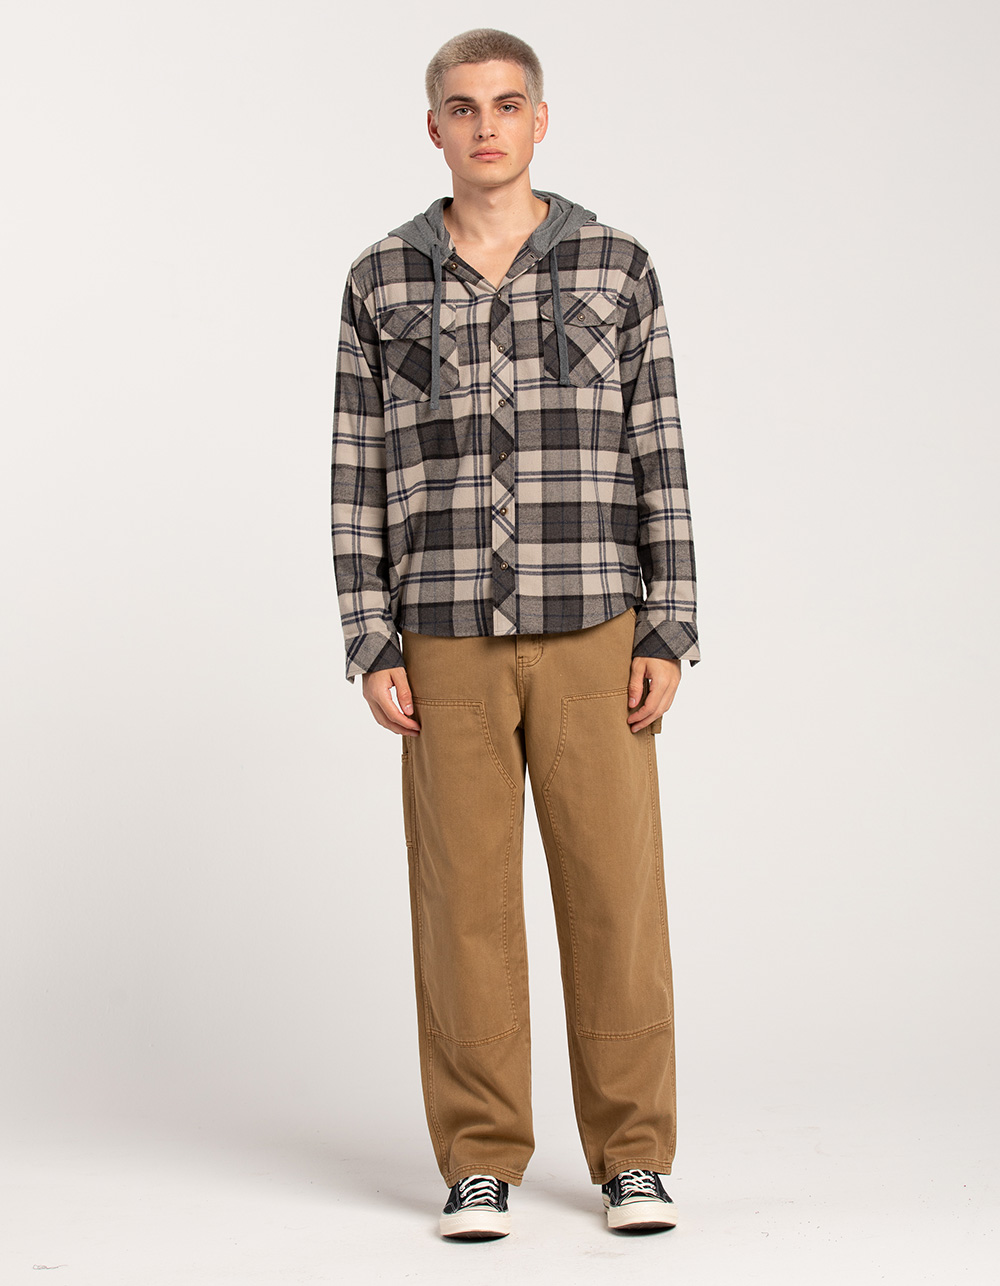 RSQ Mens Plaid Hooded Flannel - LIGHT GRAY | Tillys